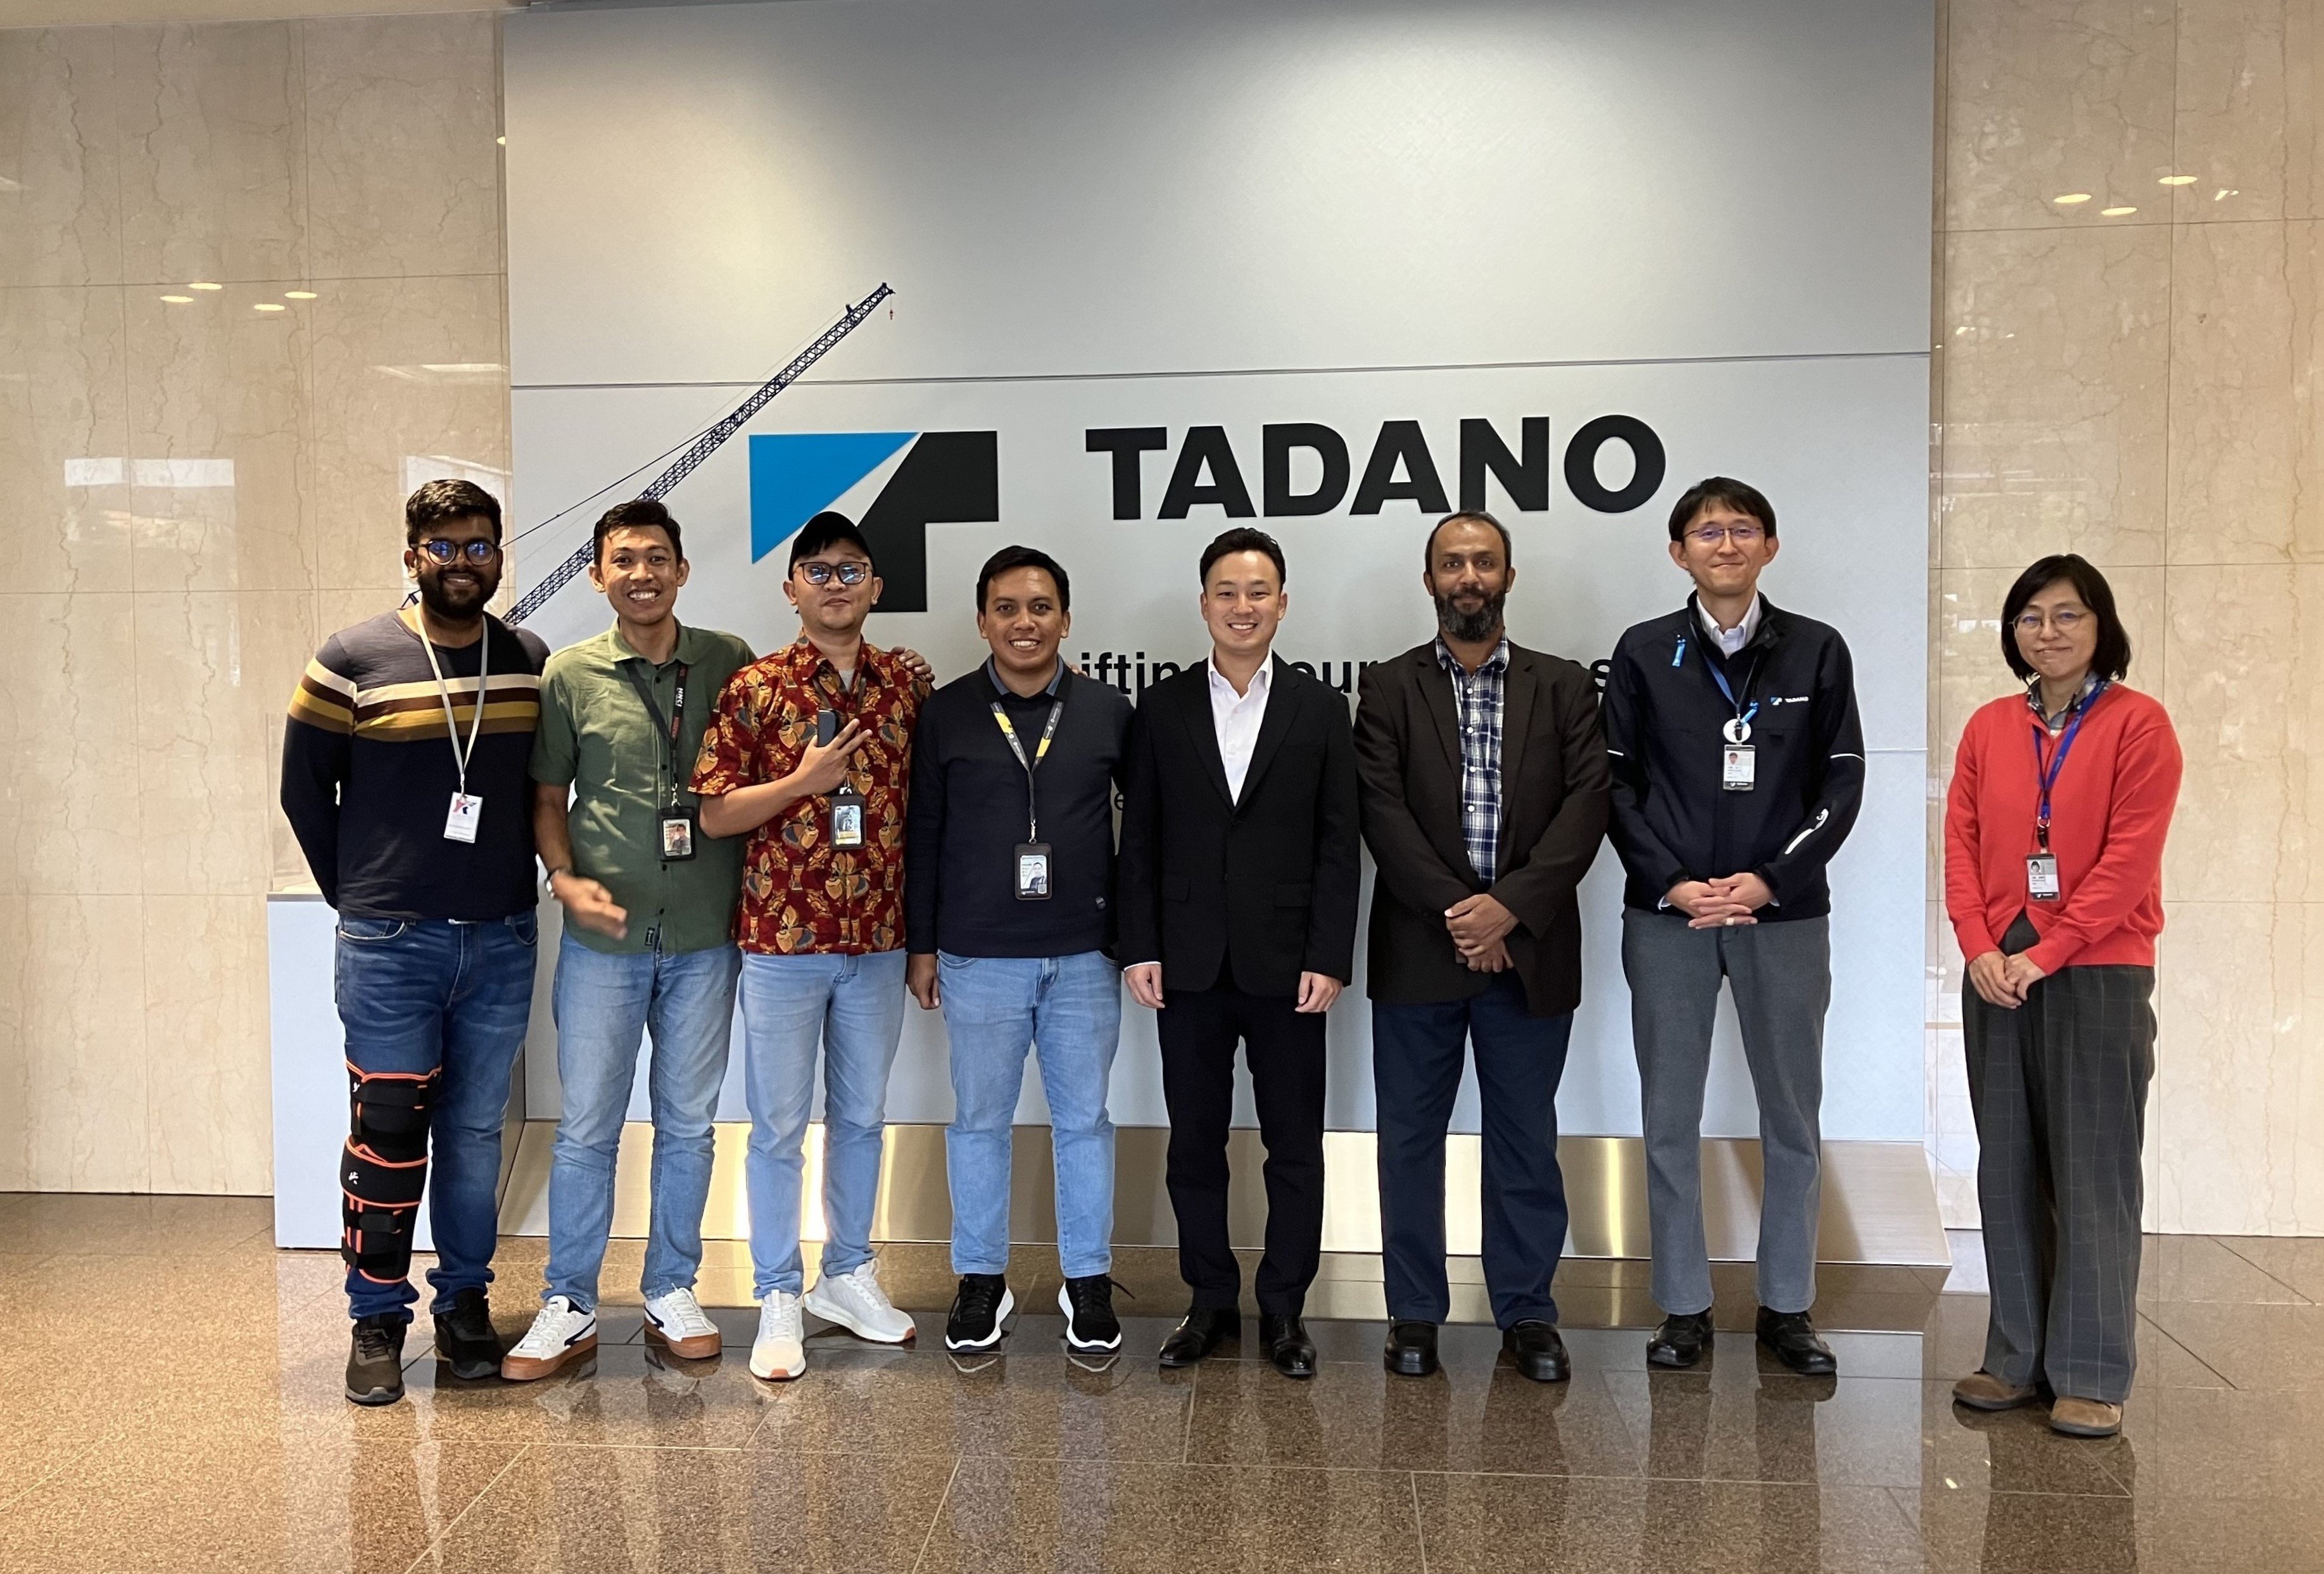 Distributors receive four-day tour of Tadano facilities in Japan in recognition of outstanding performance